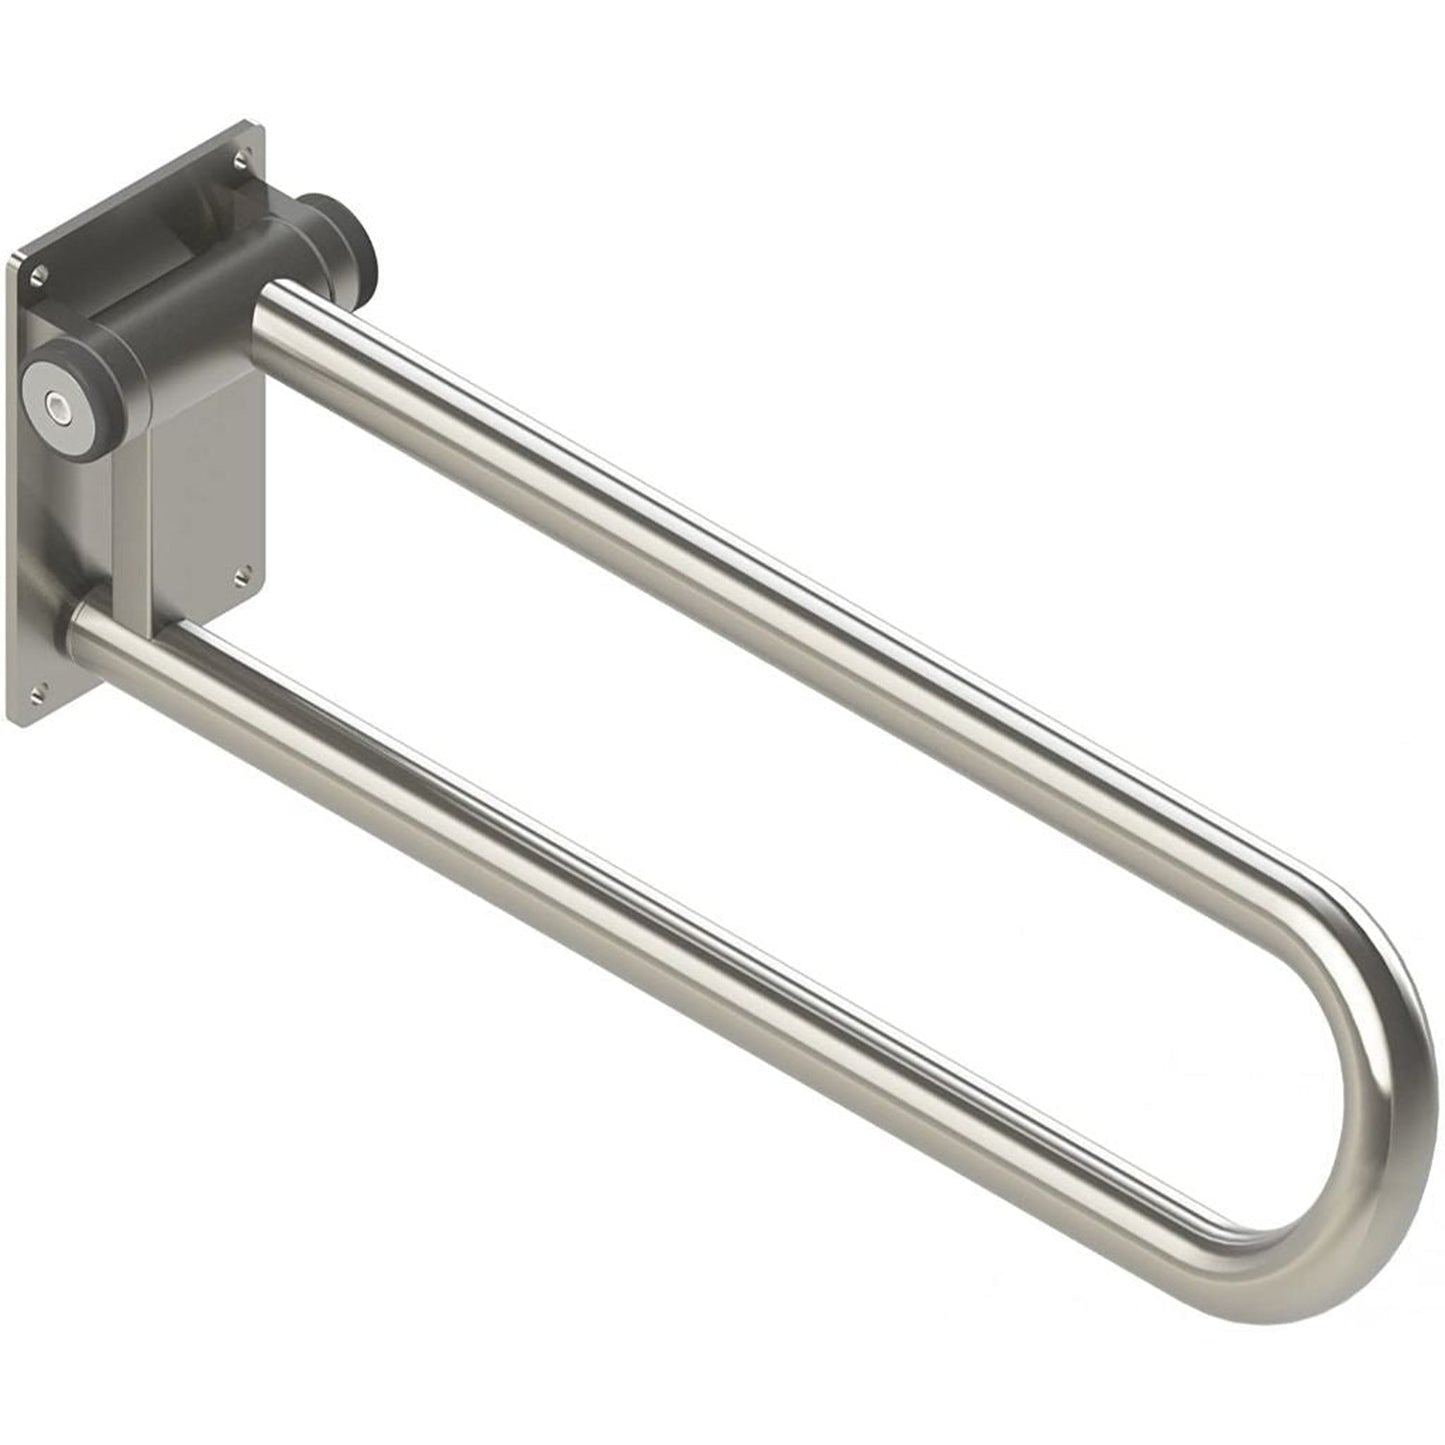 HealthCraft PT Rail 36" Stainless Steel Left and Right Side Grab Bar